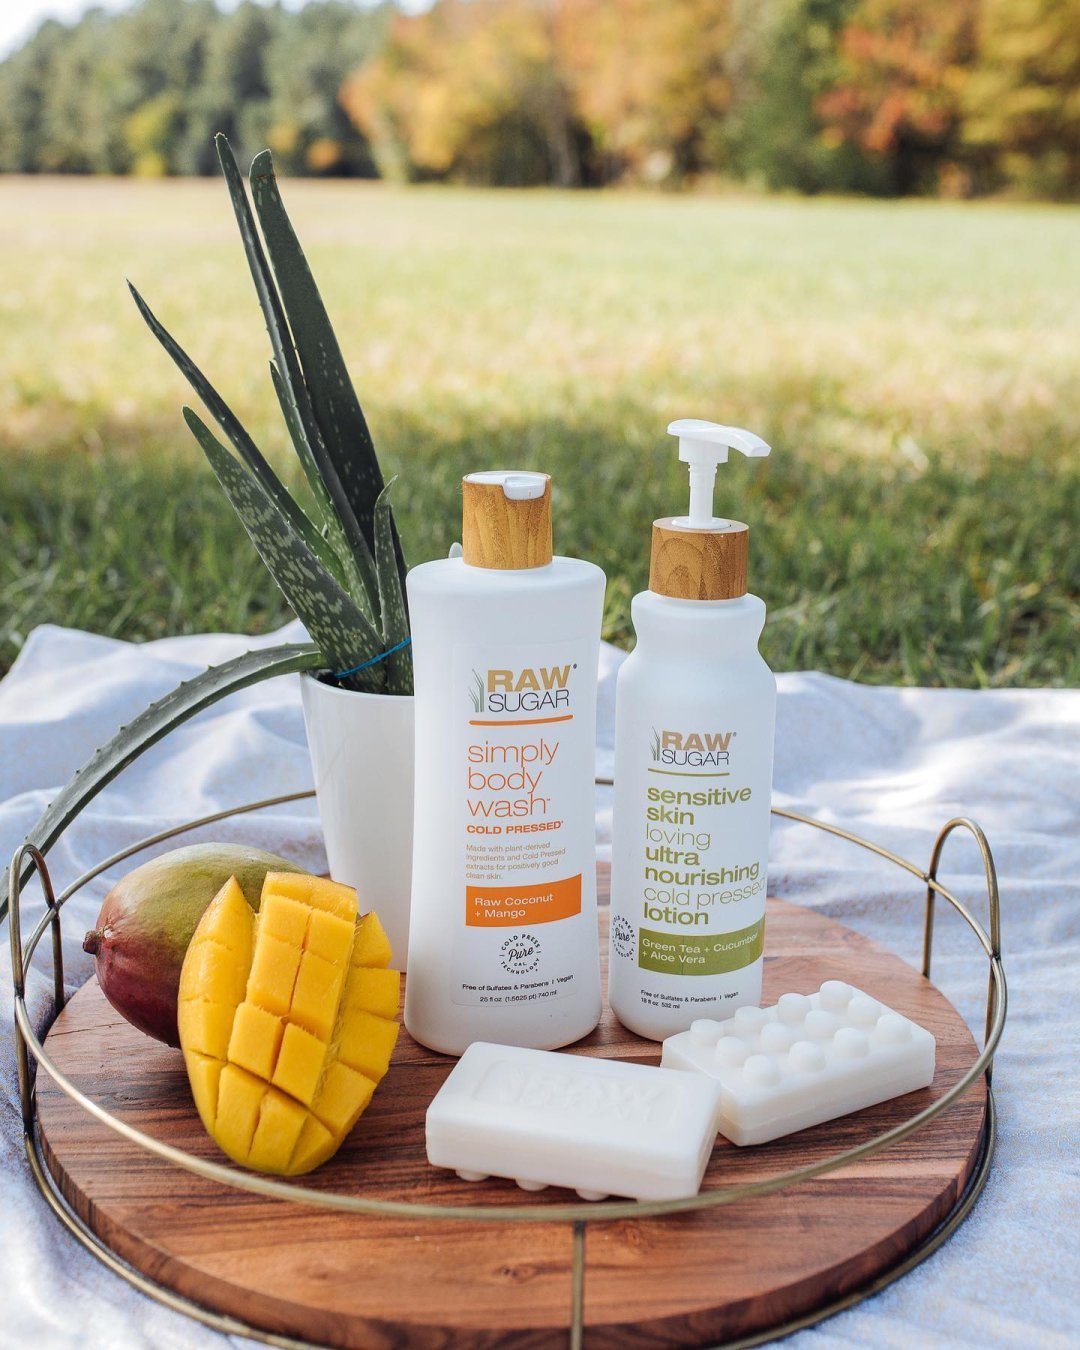 Courtesy. Raw Sugar Living has seen several successes, including launching in Target stores chain-wide and introducing over 140 products into the marketplace.